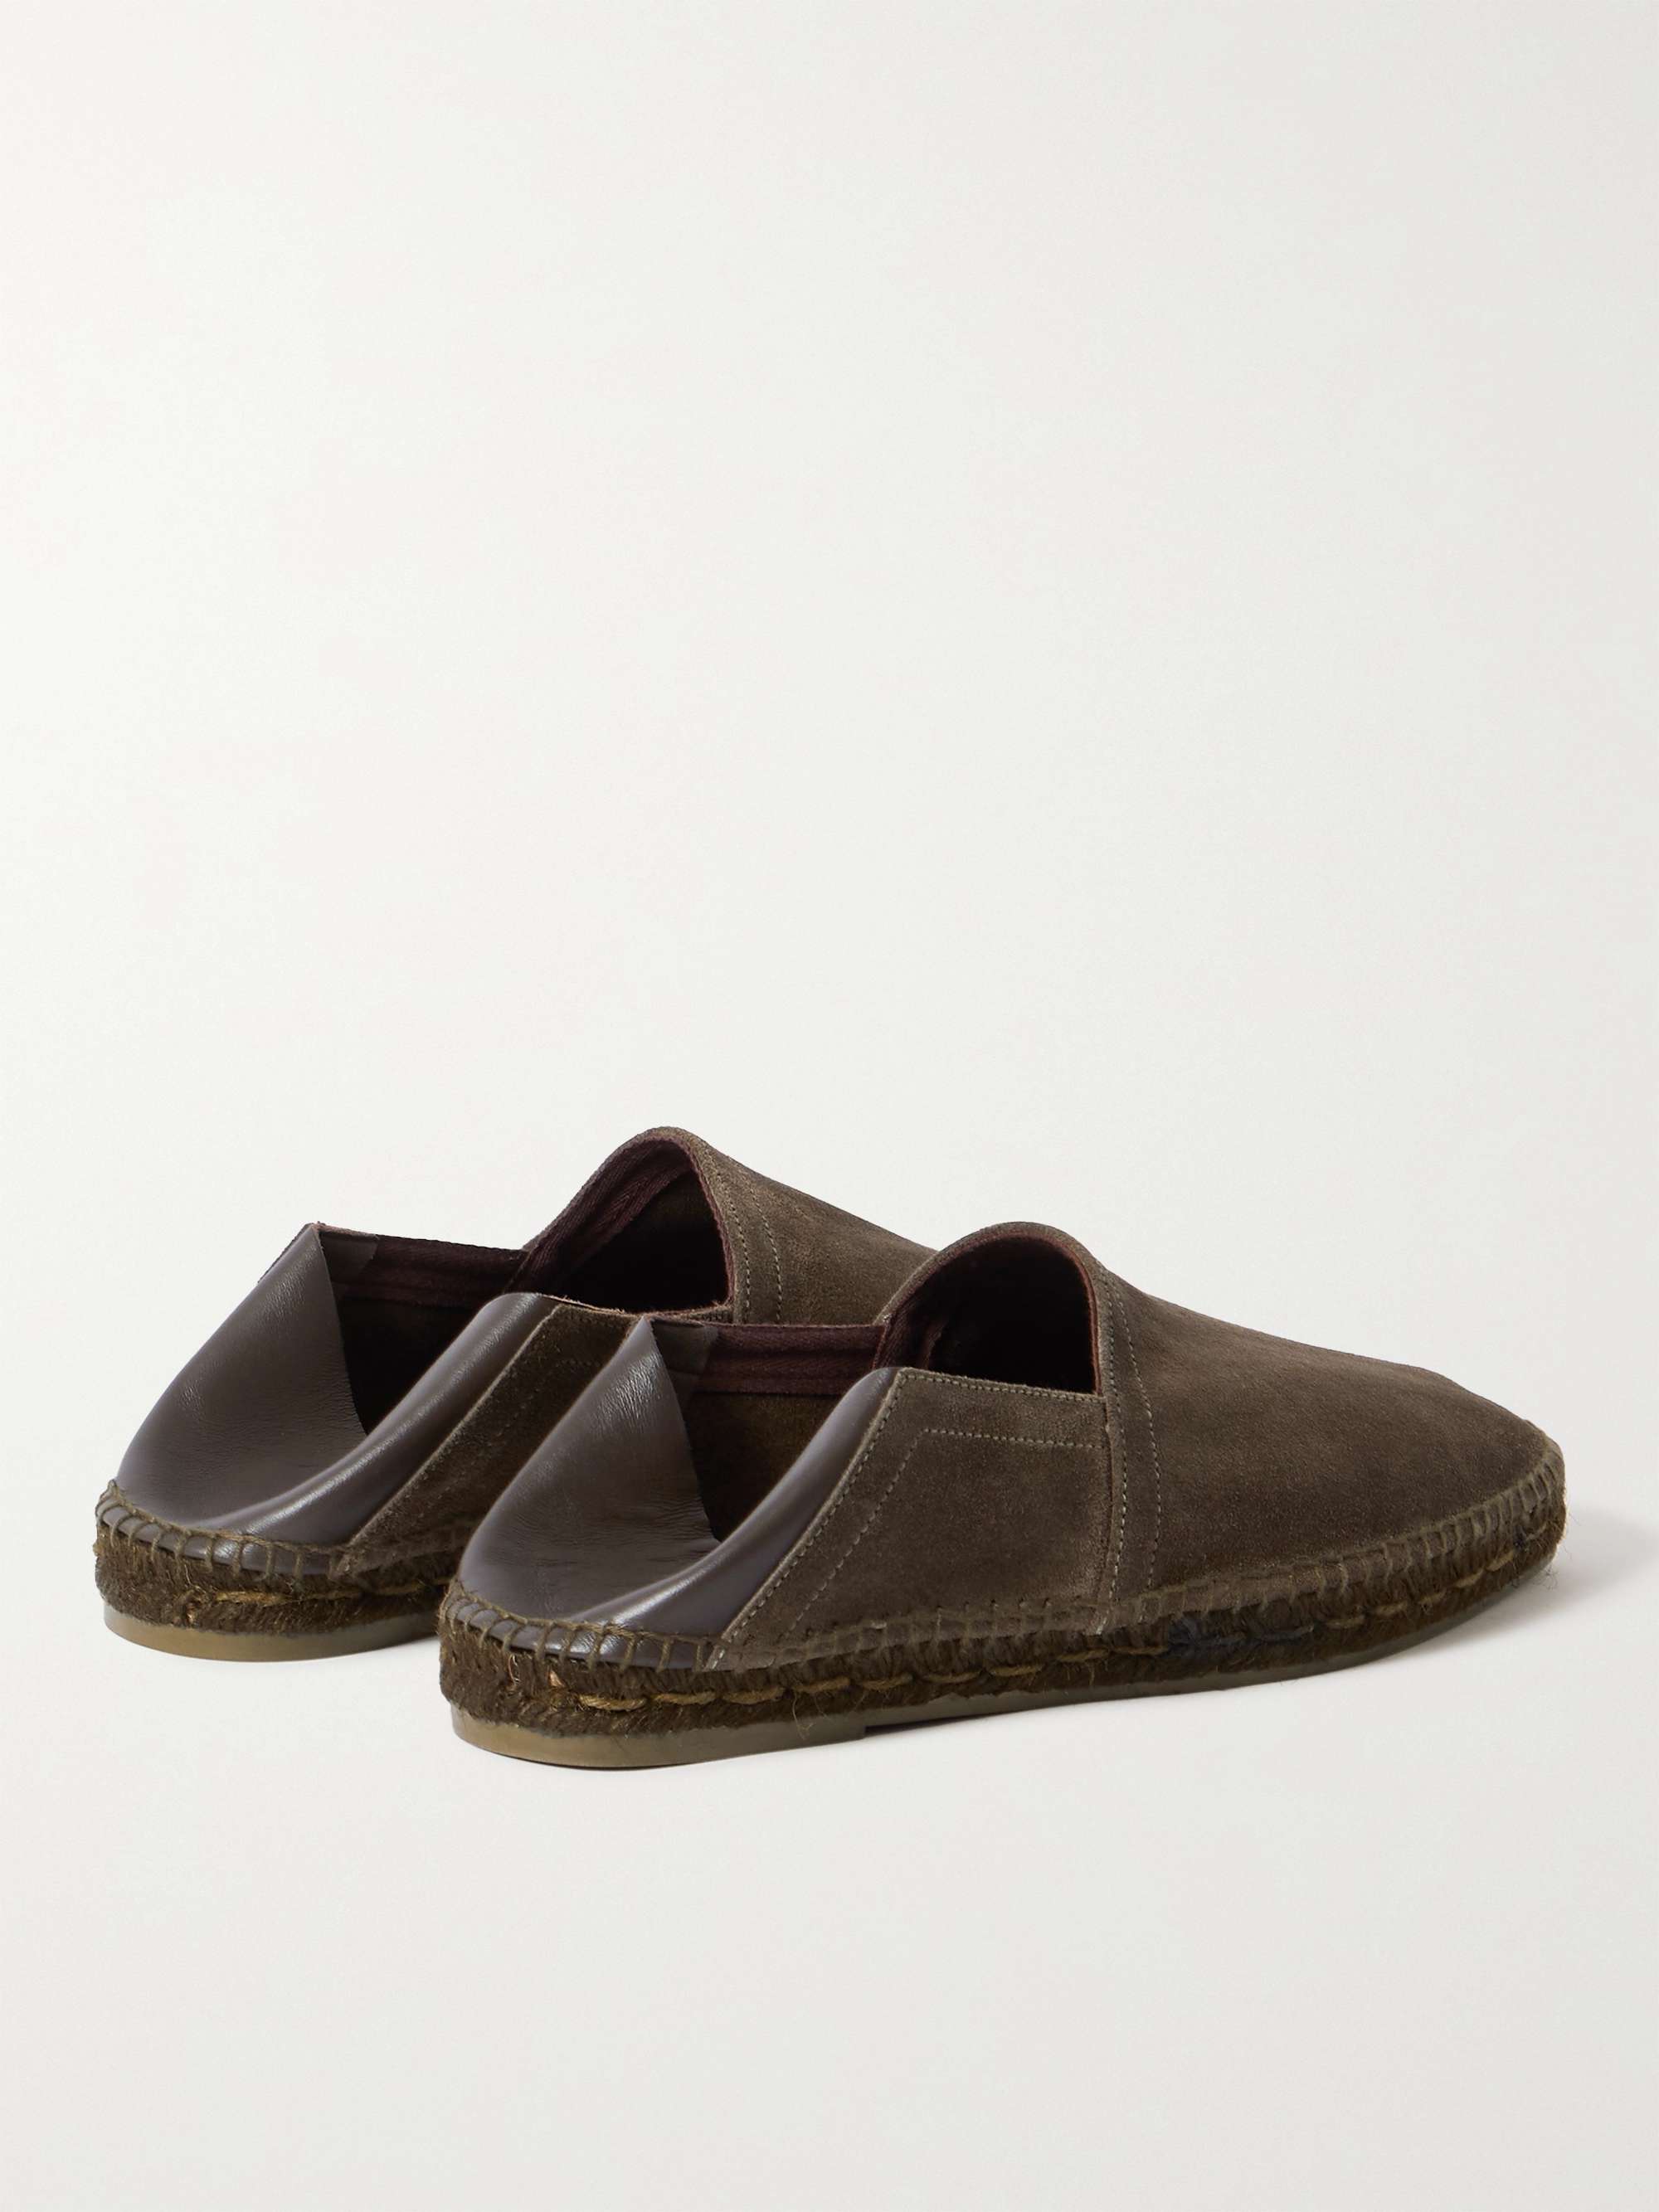 TOM FORD Barnes Collapsible-Heel Leather-Trimmed Suede Espadrilles